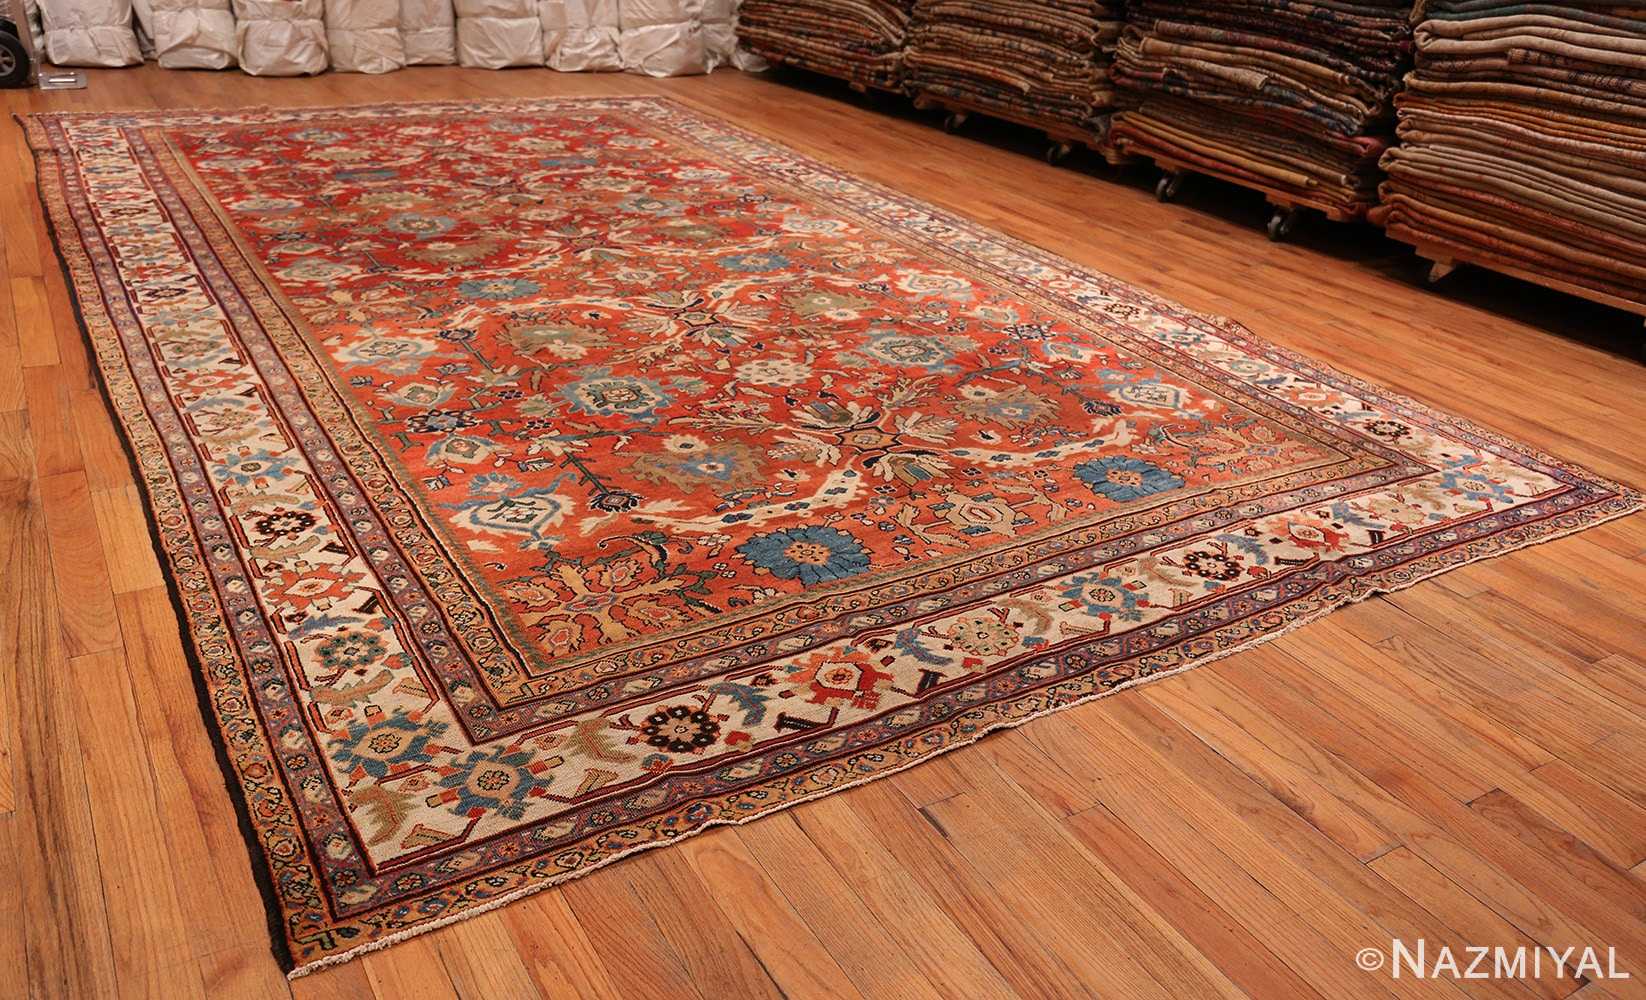 A full picture of the antique large scale persian sultanabad carpet #48563 from Nazmiyal Antique Rugs NYC